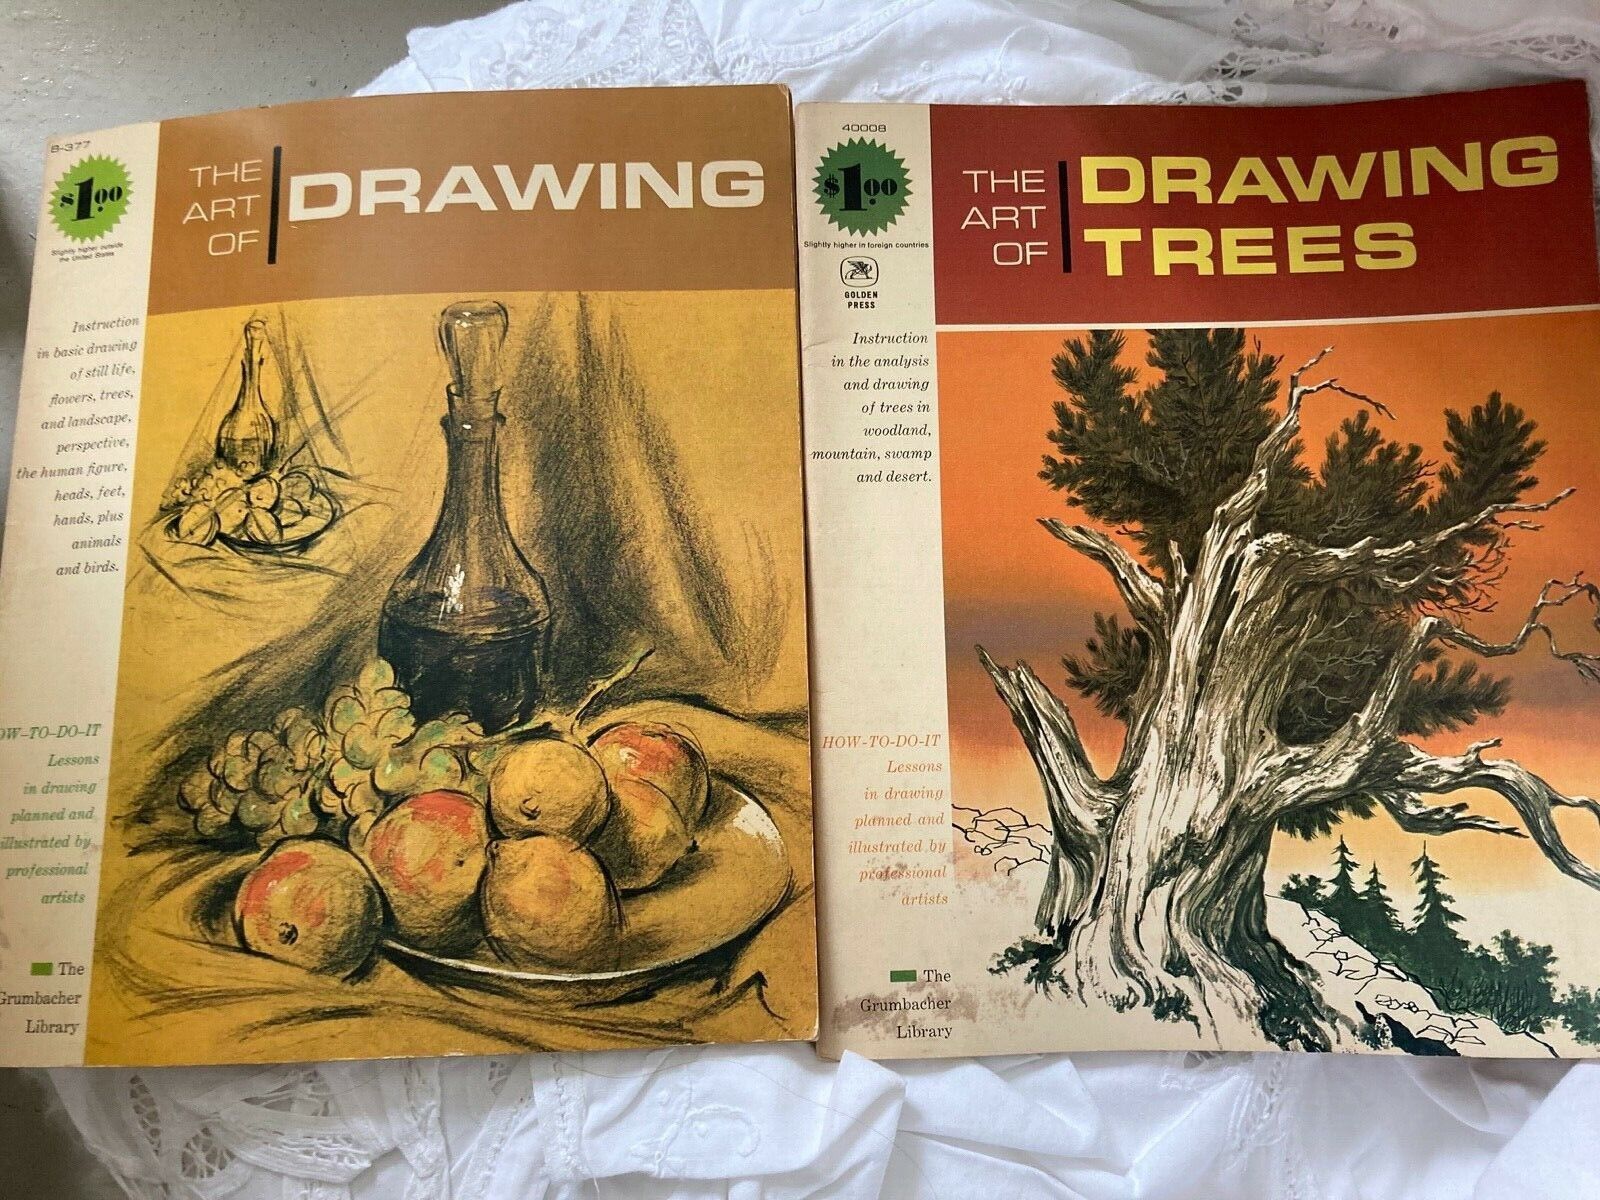 Lot of 2 Vintage The Art of Drawing Trees/Drawing by The Grumbacher Library Grumbacher